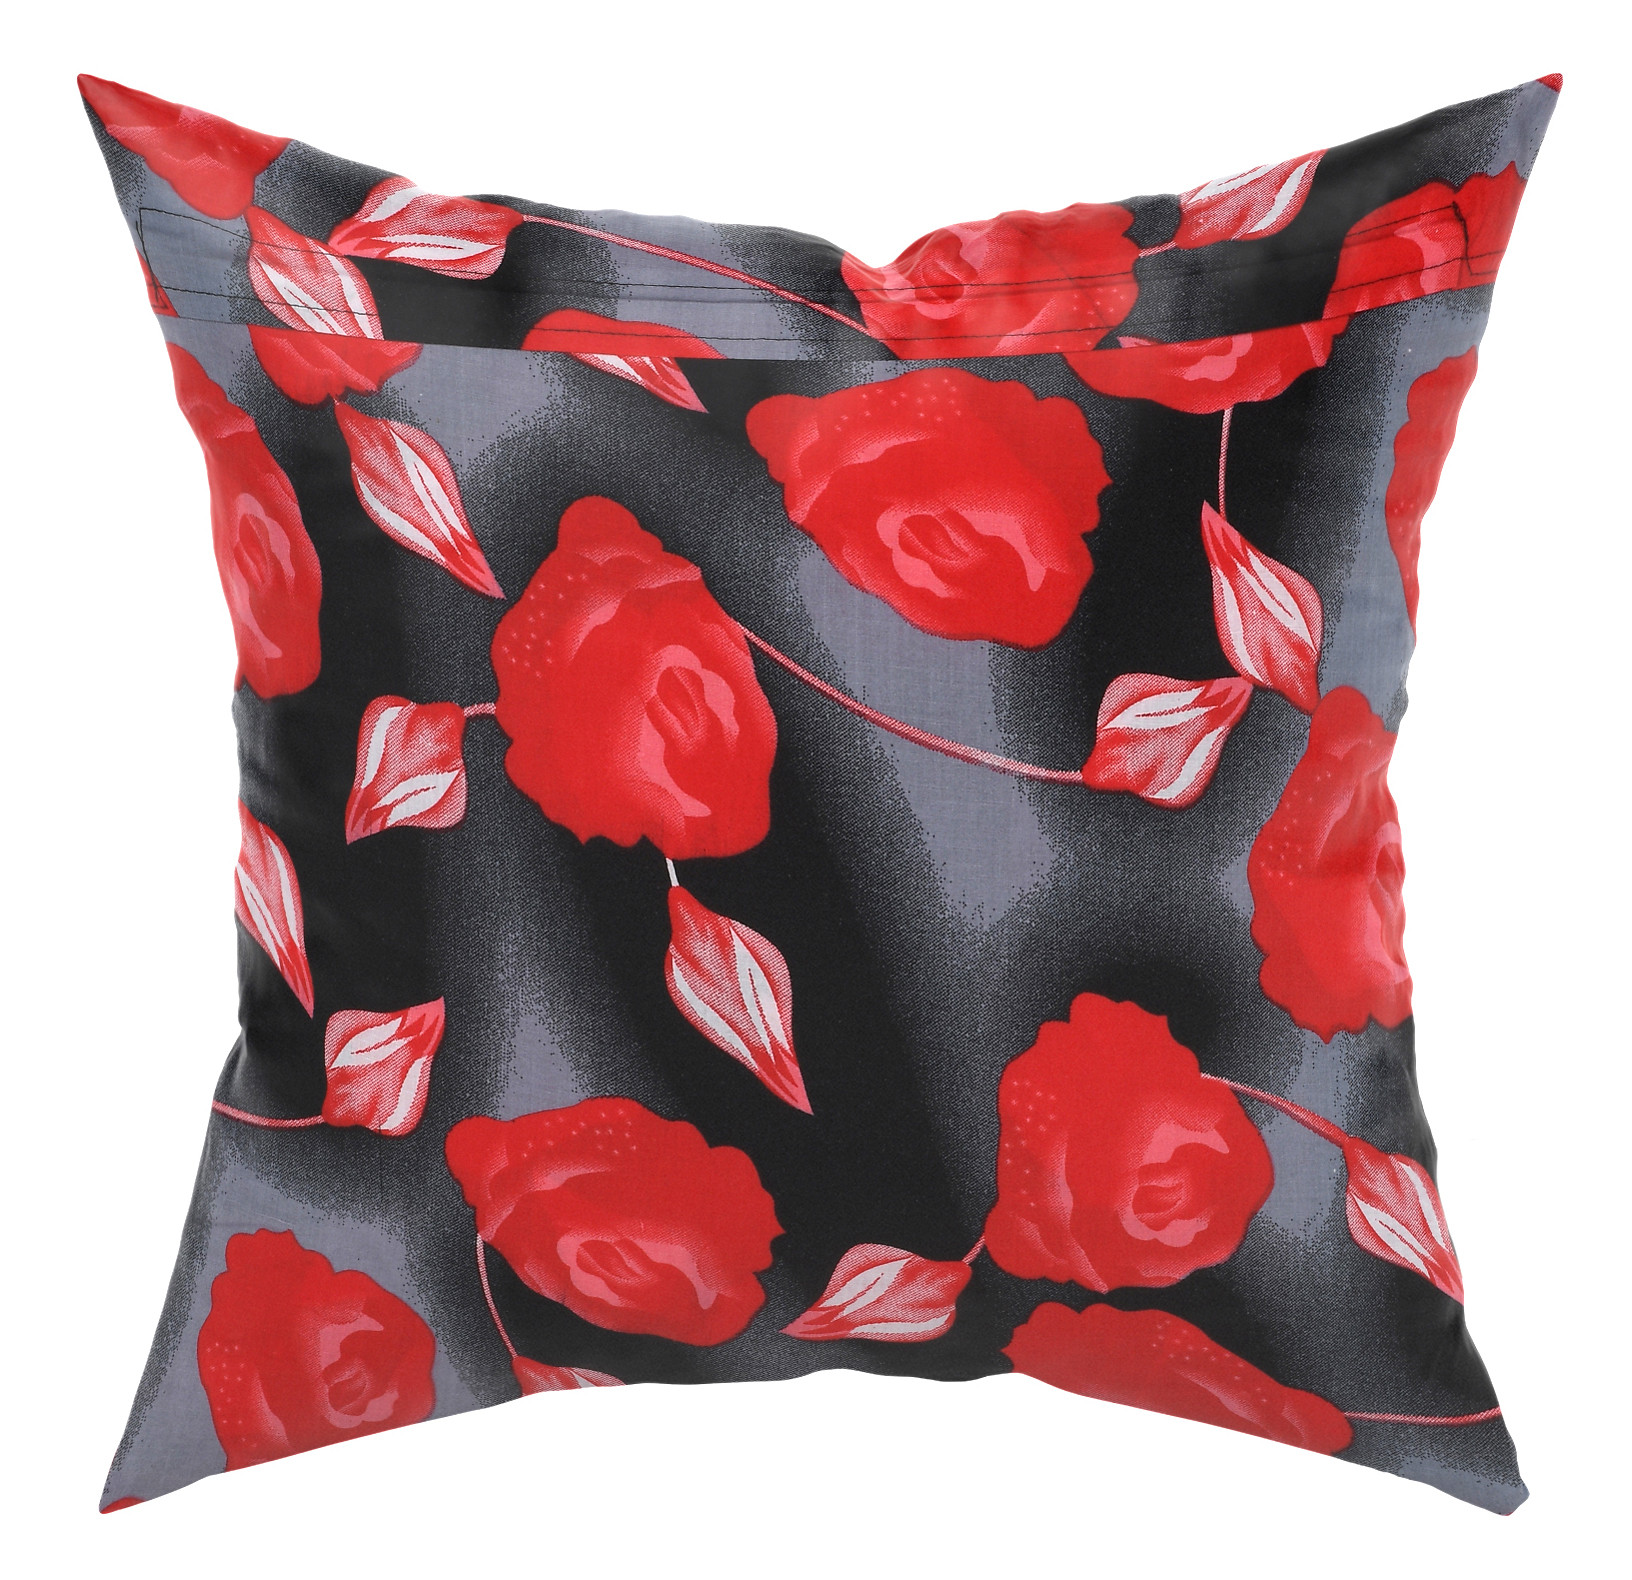 Kuber Industries Flower Print Cotton Abstract Decorative Throw Pillow/Cushion Covers 16